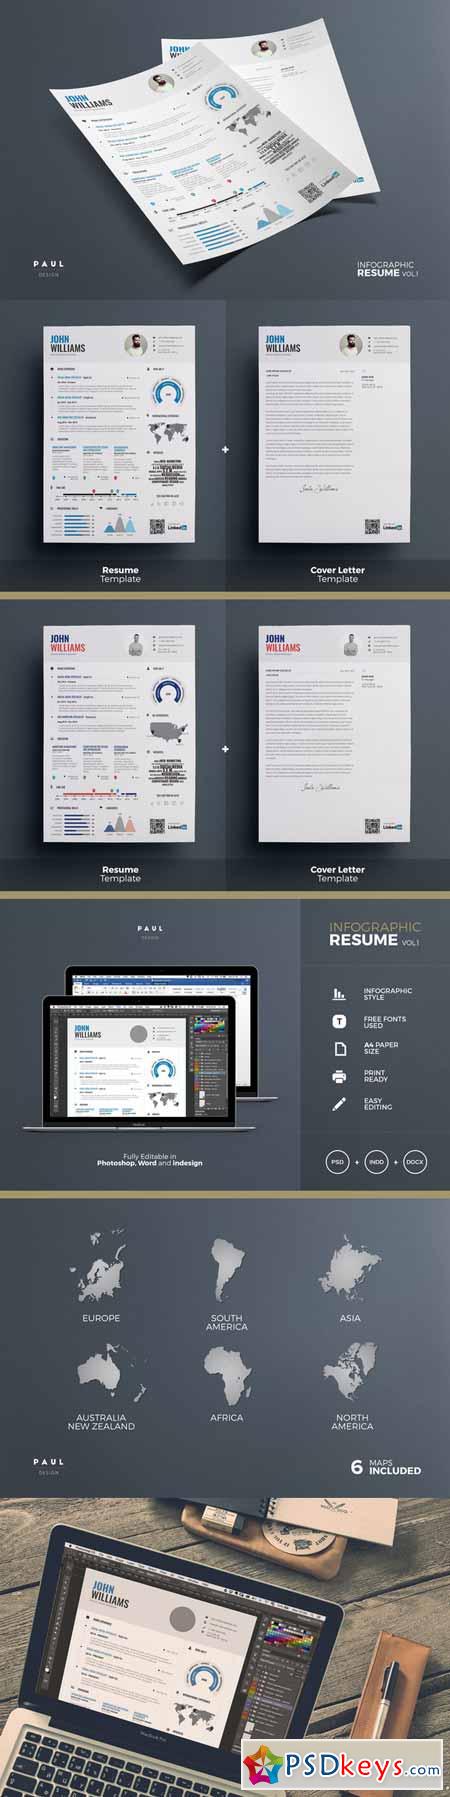 Infographic Resume - Psd Indd & Docx 220474